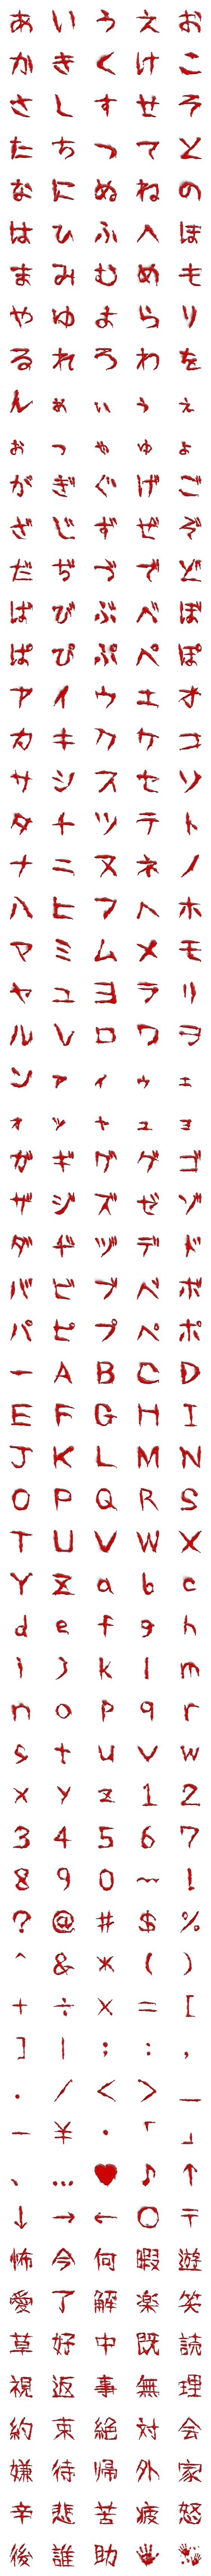 [LINE絵文字]※注意※ 恐怖の絵文字、、、の画像一覧